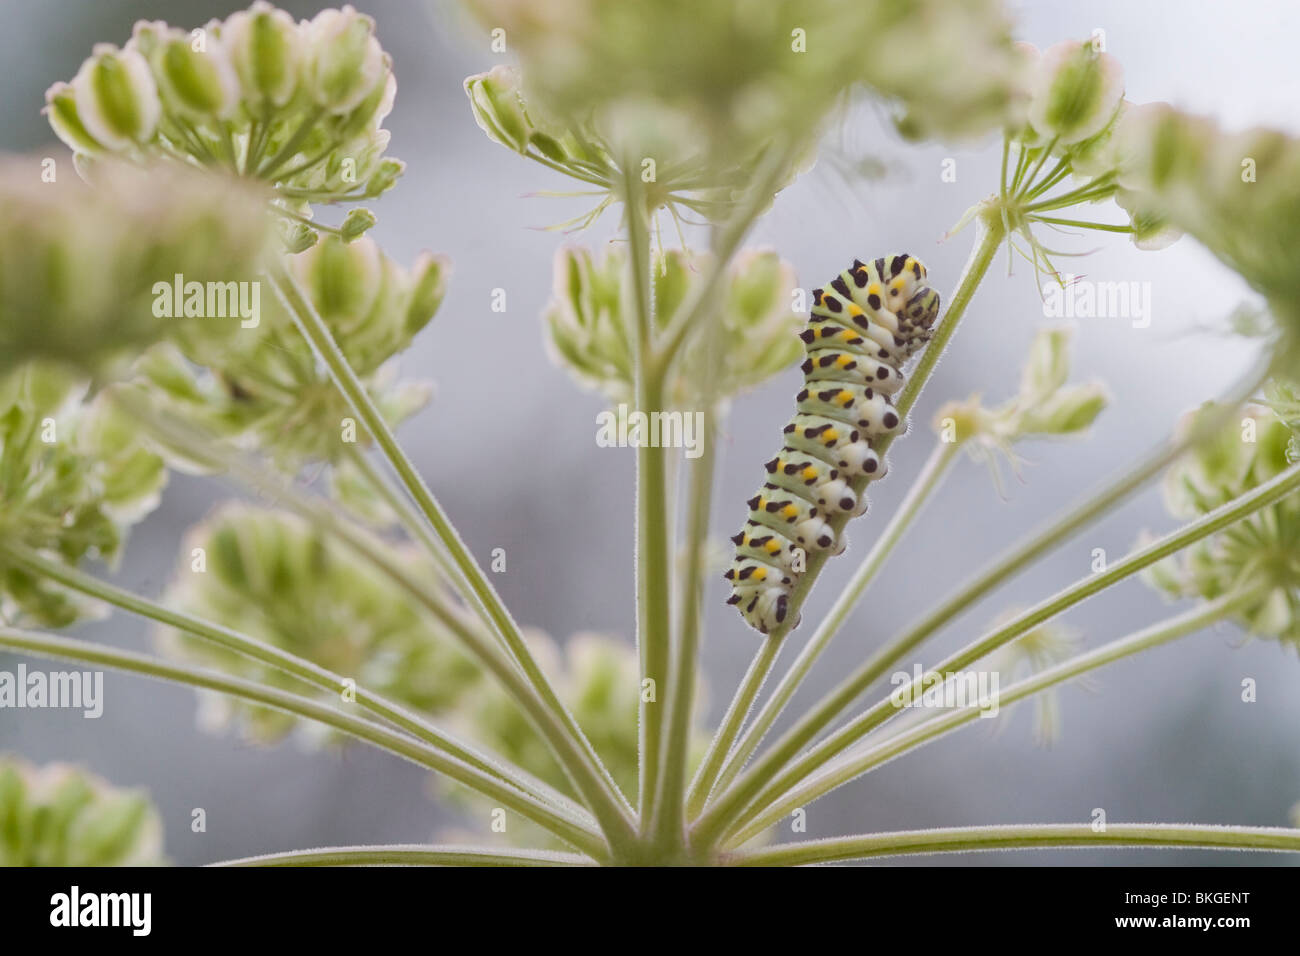 Caterpillar of Swallowtail butterfly (Papilio machaon) on a flower of Wild carrot Stock Photo